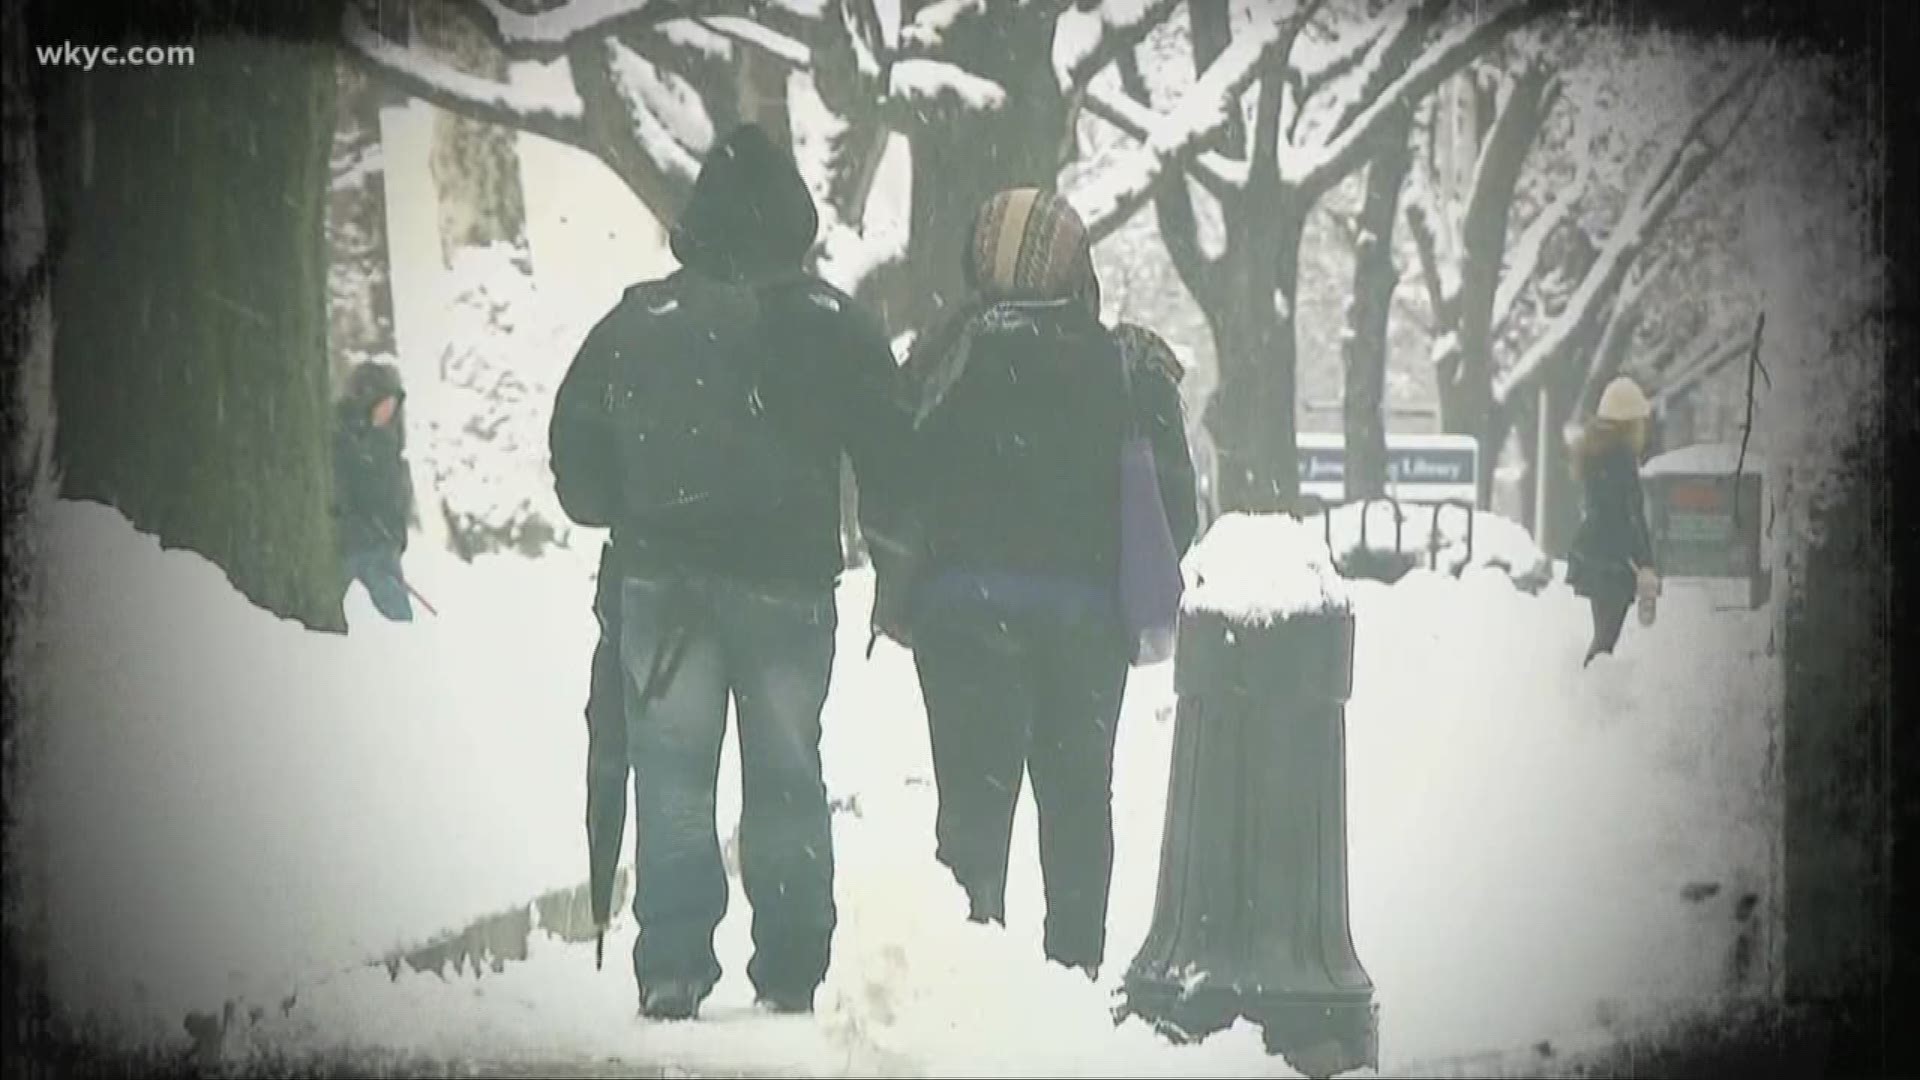 From the summer to winter, your mood can change. Ray Strickland reports.